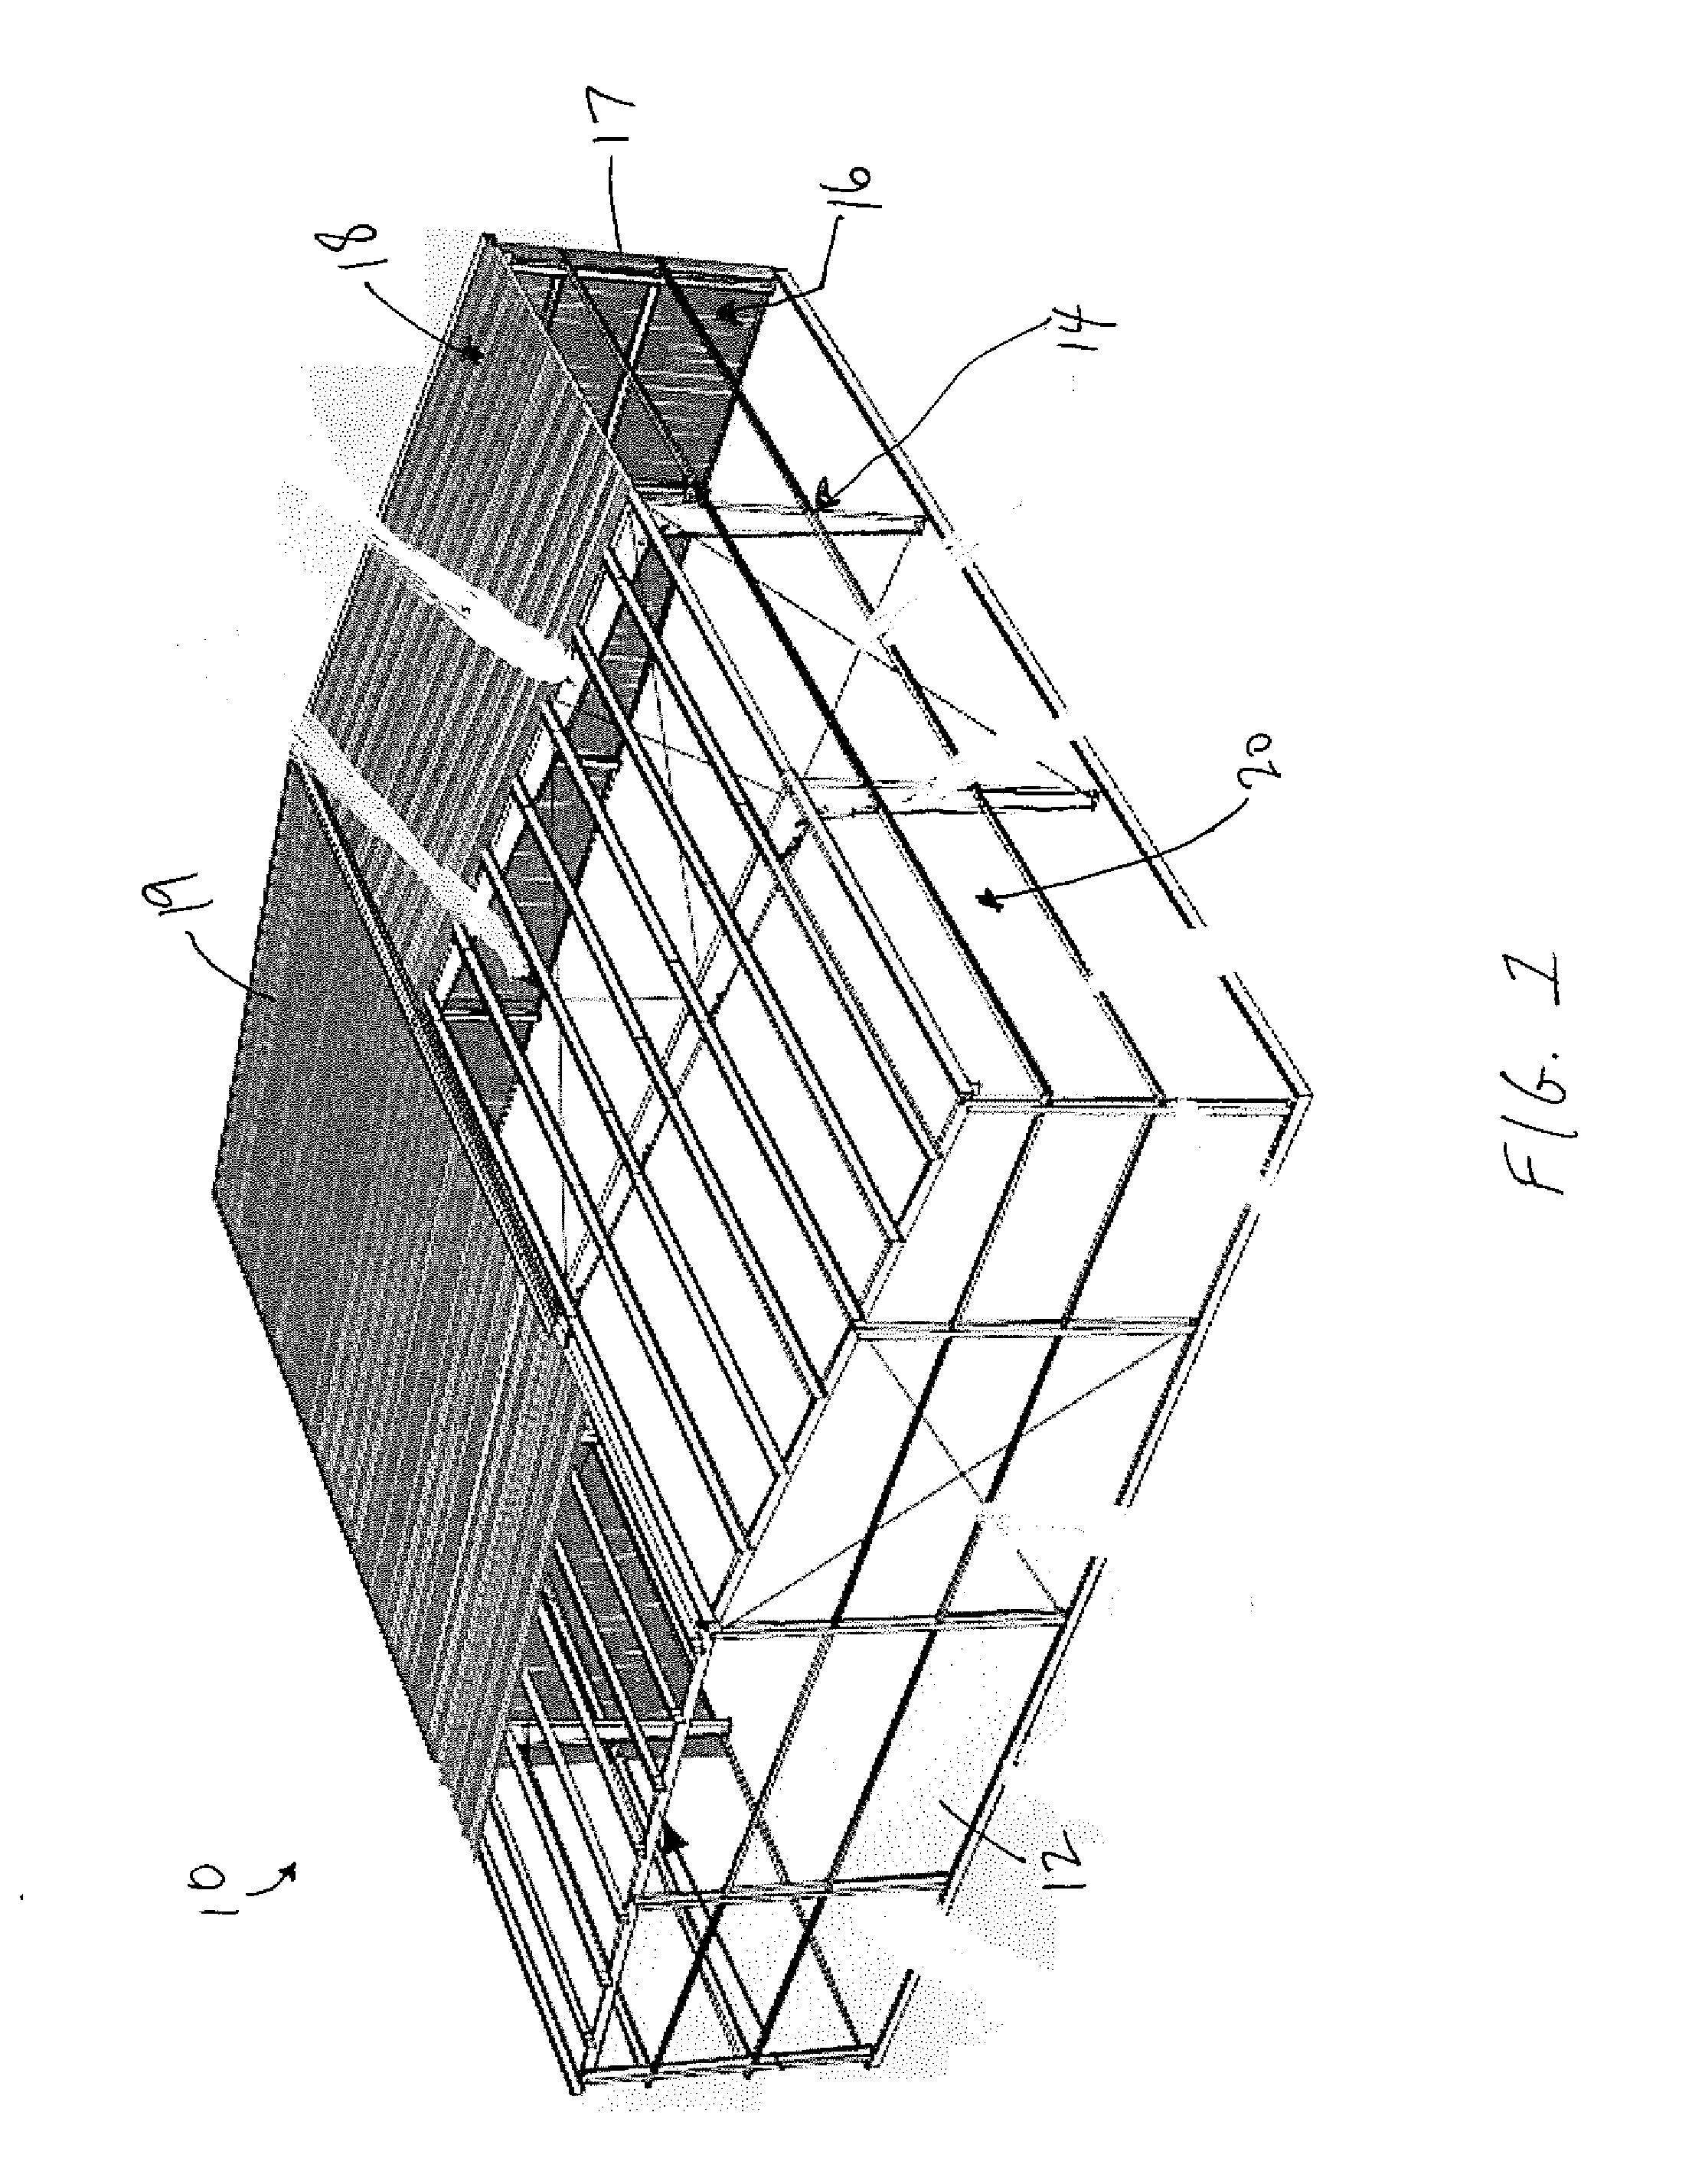 Insulation system for a pre-engineered metal building